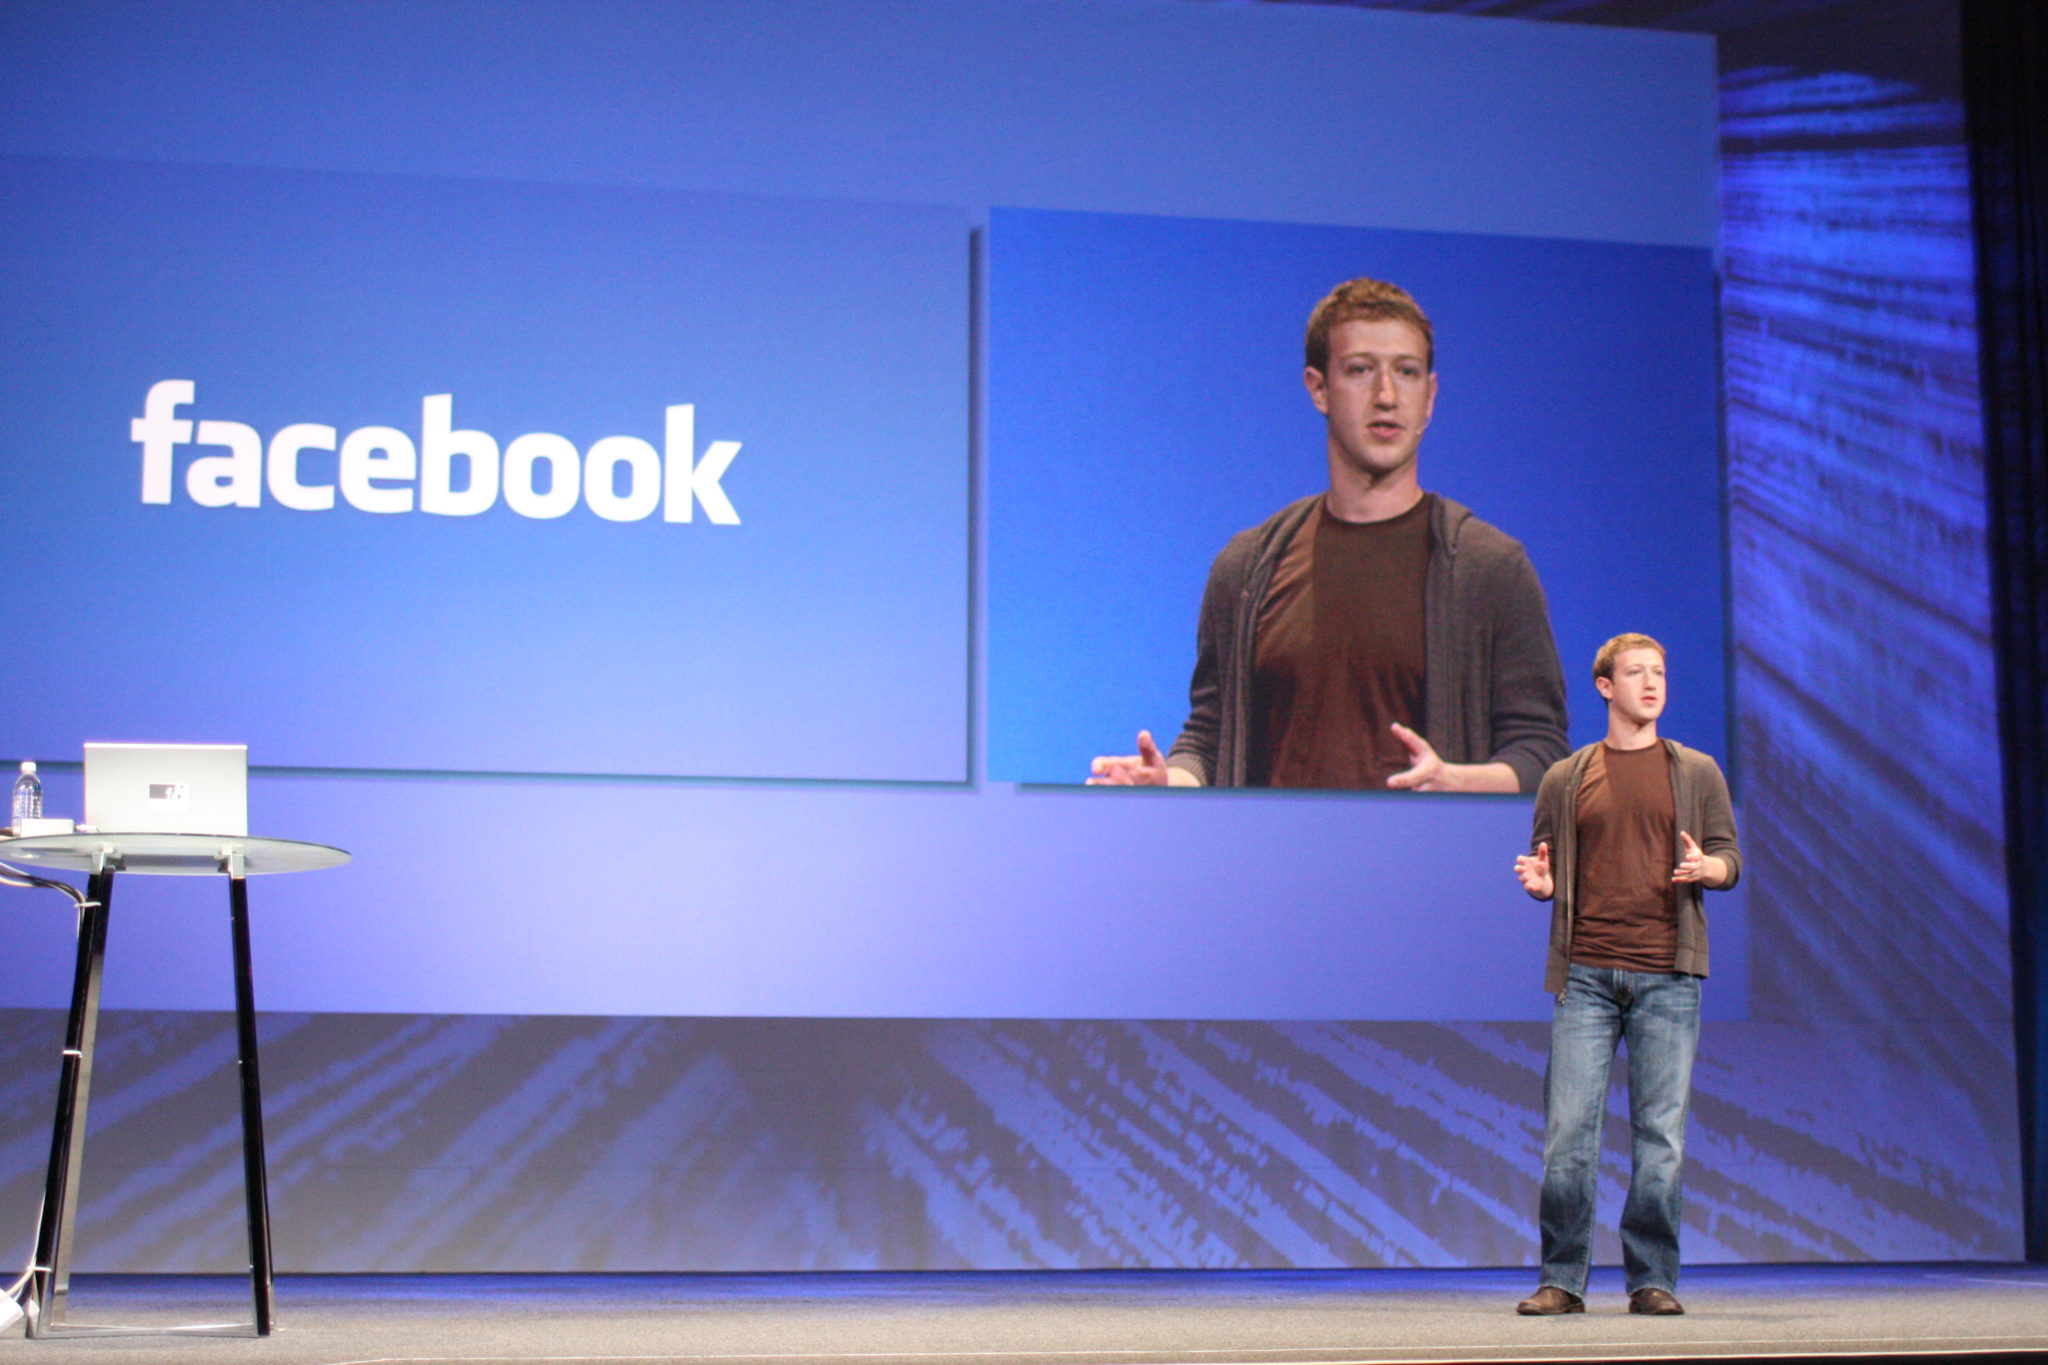 Top 10 Health and Fitness Tips From Mark Zuckerberg